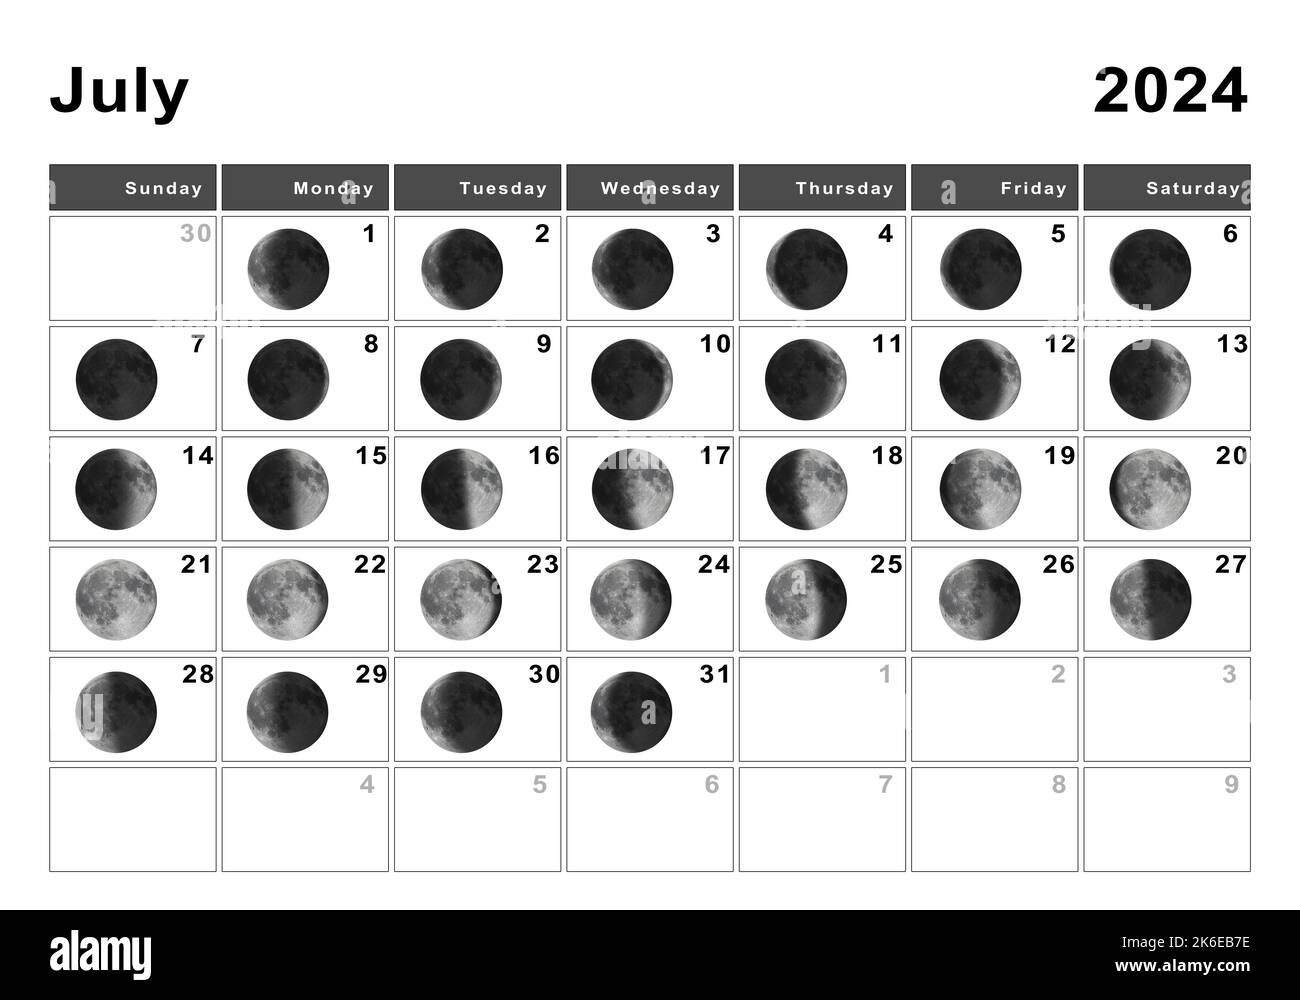 May 2024 Lunar calendar, Moon cycles, Moon Phases Stock Photo - Alamy